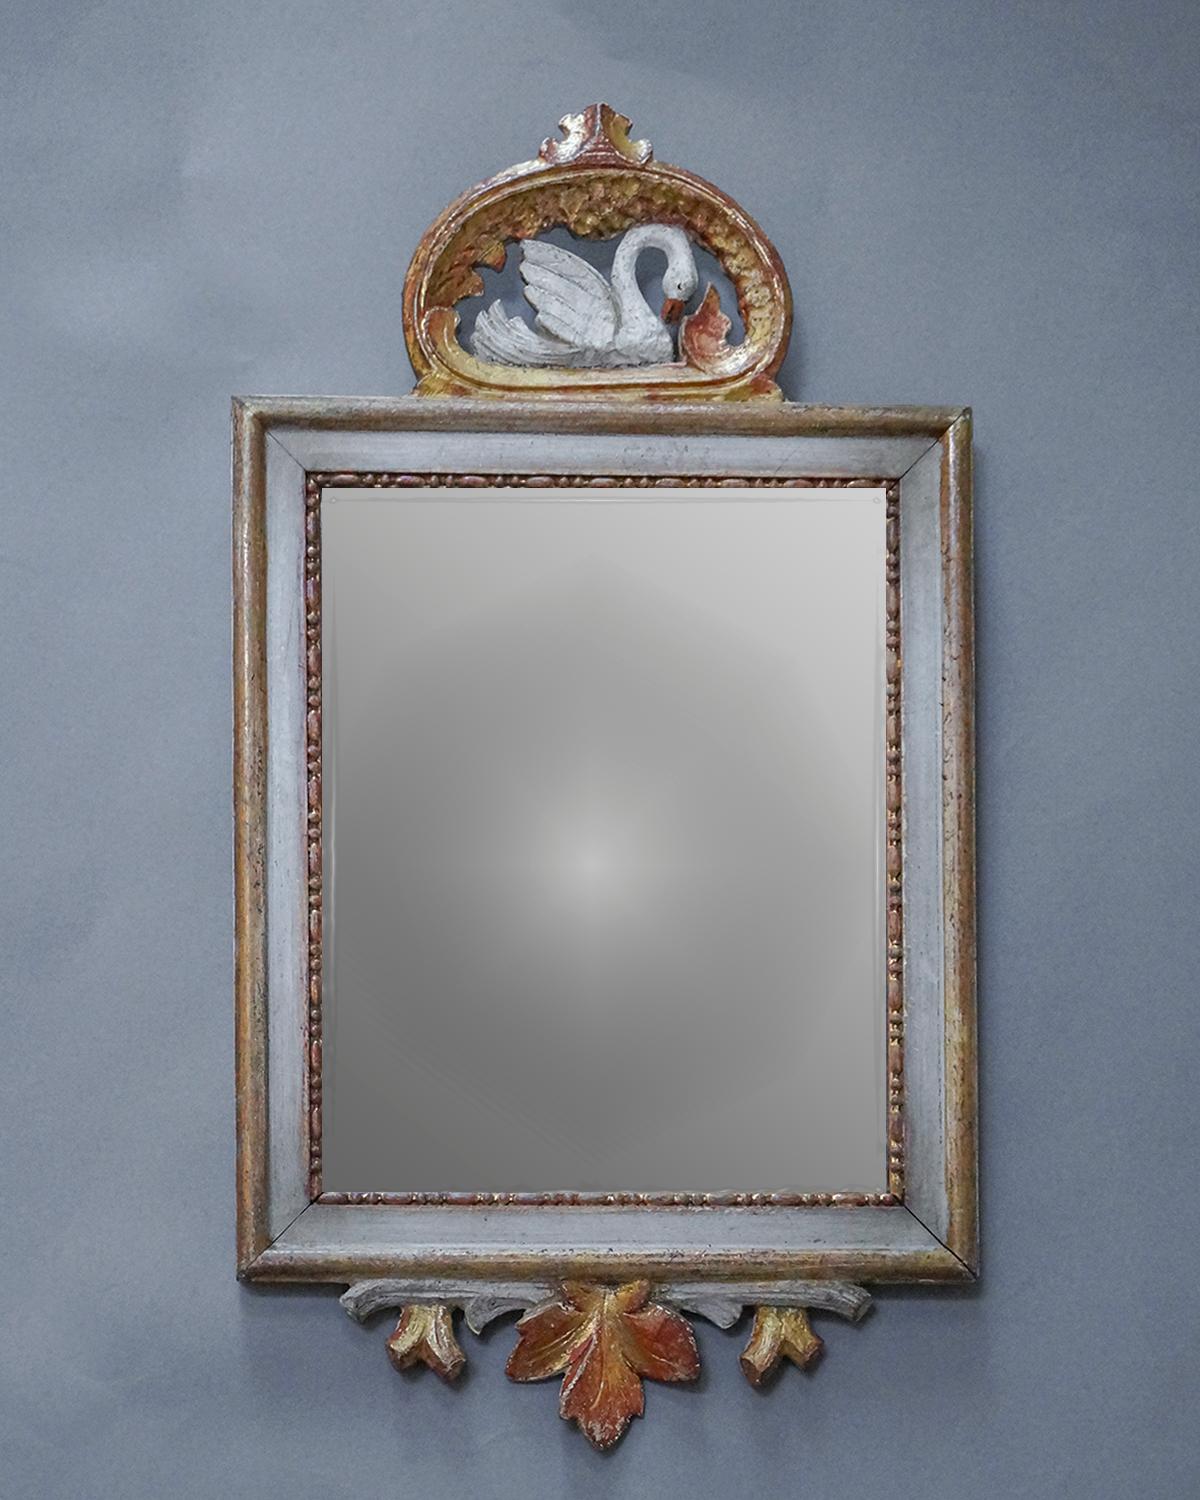 Lovely small wall mirror, Sweden, circa 1860, with a gilded frame. At the top is a carved crest depicting a swan among the waves. At the bottom is a carved leafy branch. Original surface and mirror glass.